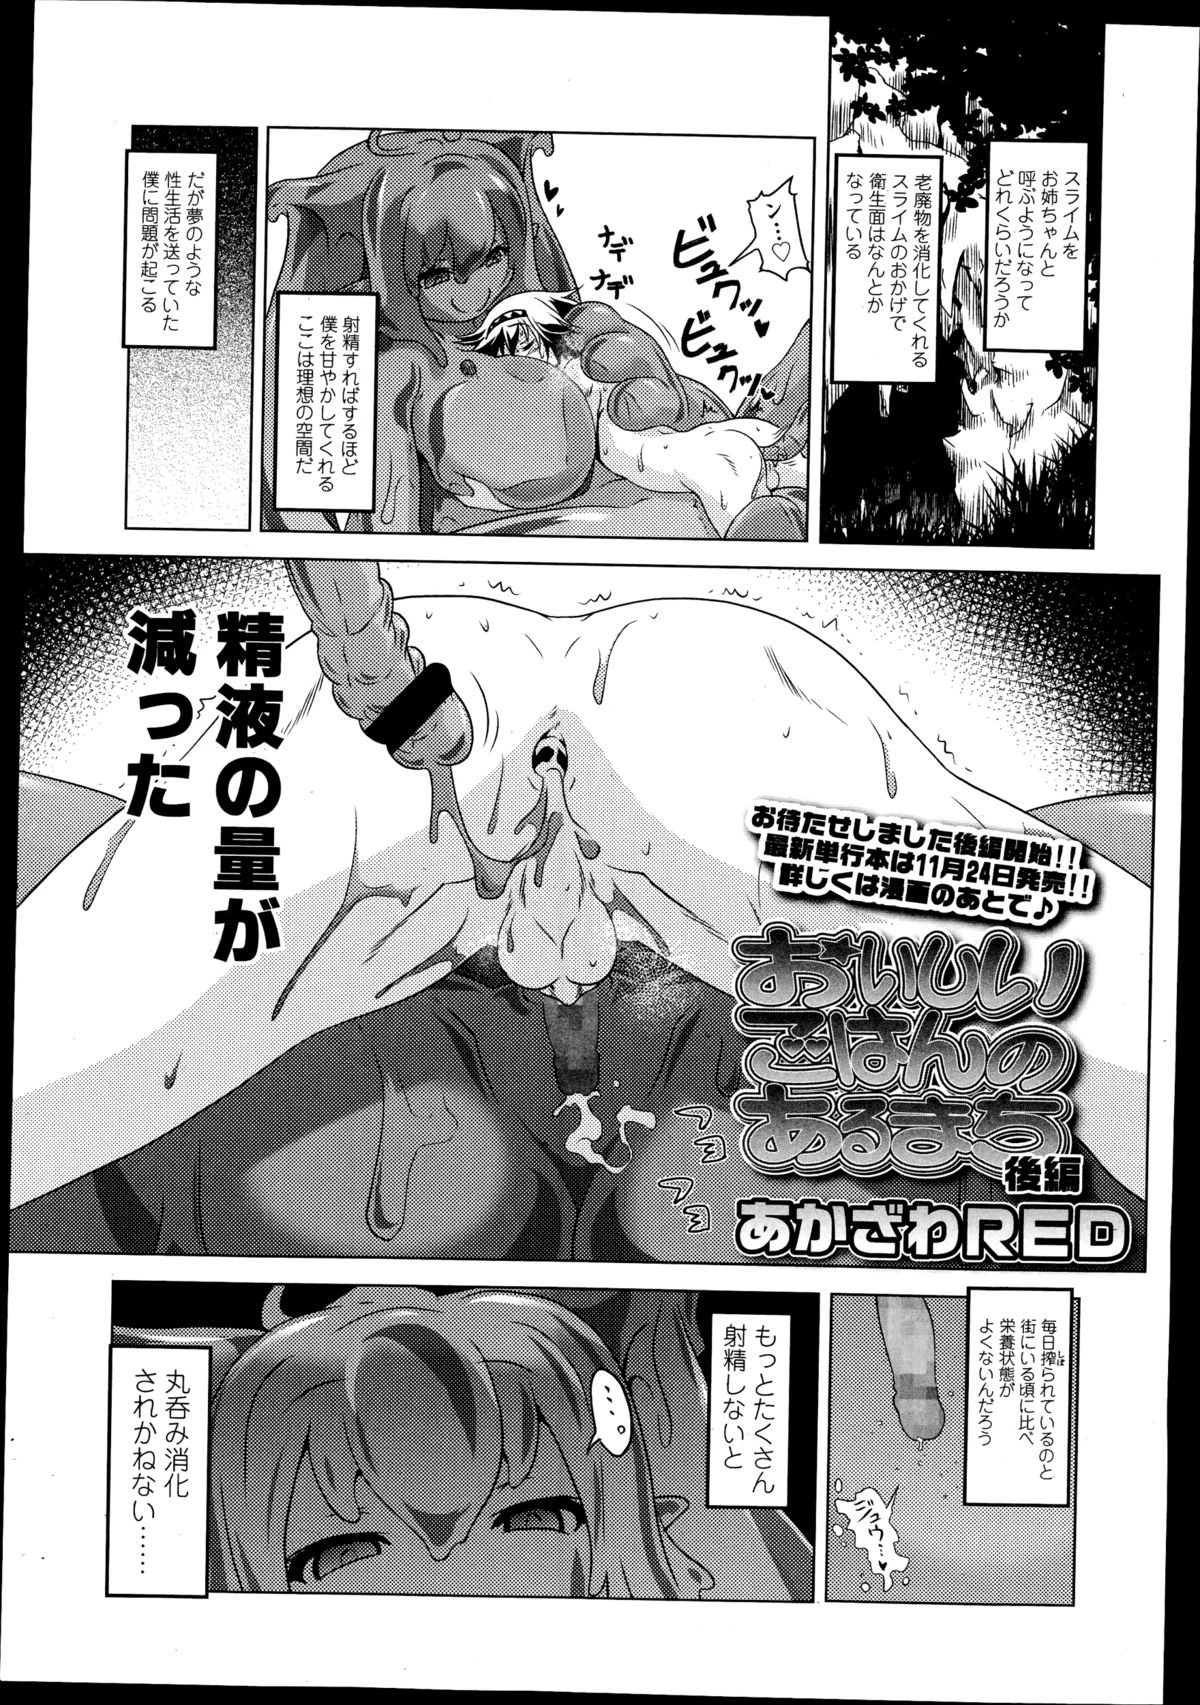 Girls forM Vol. 08 page 47 full